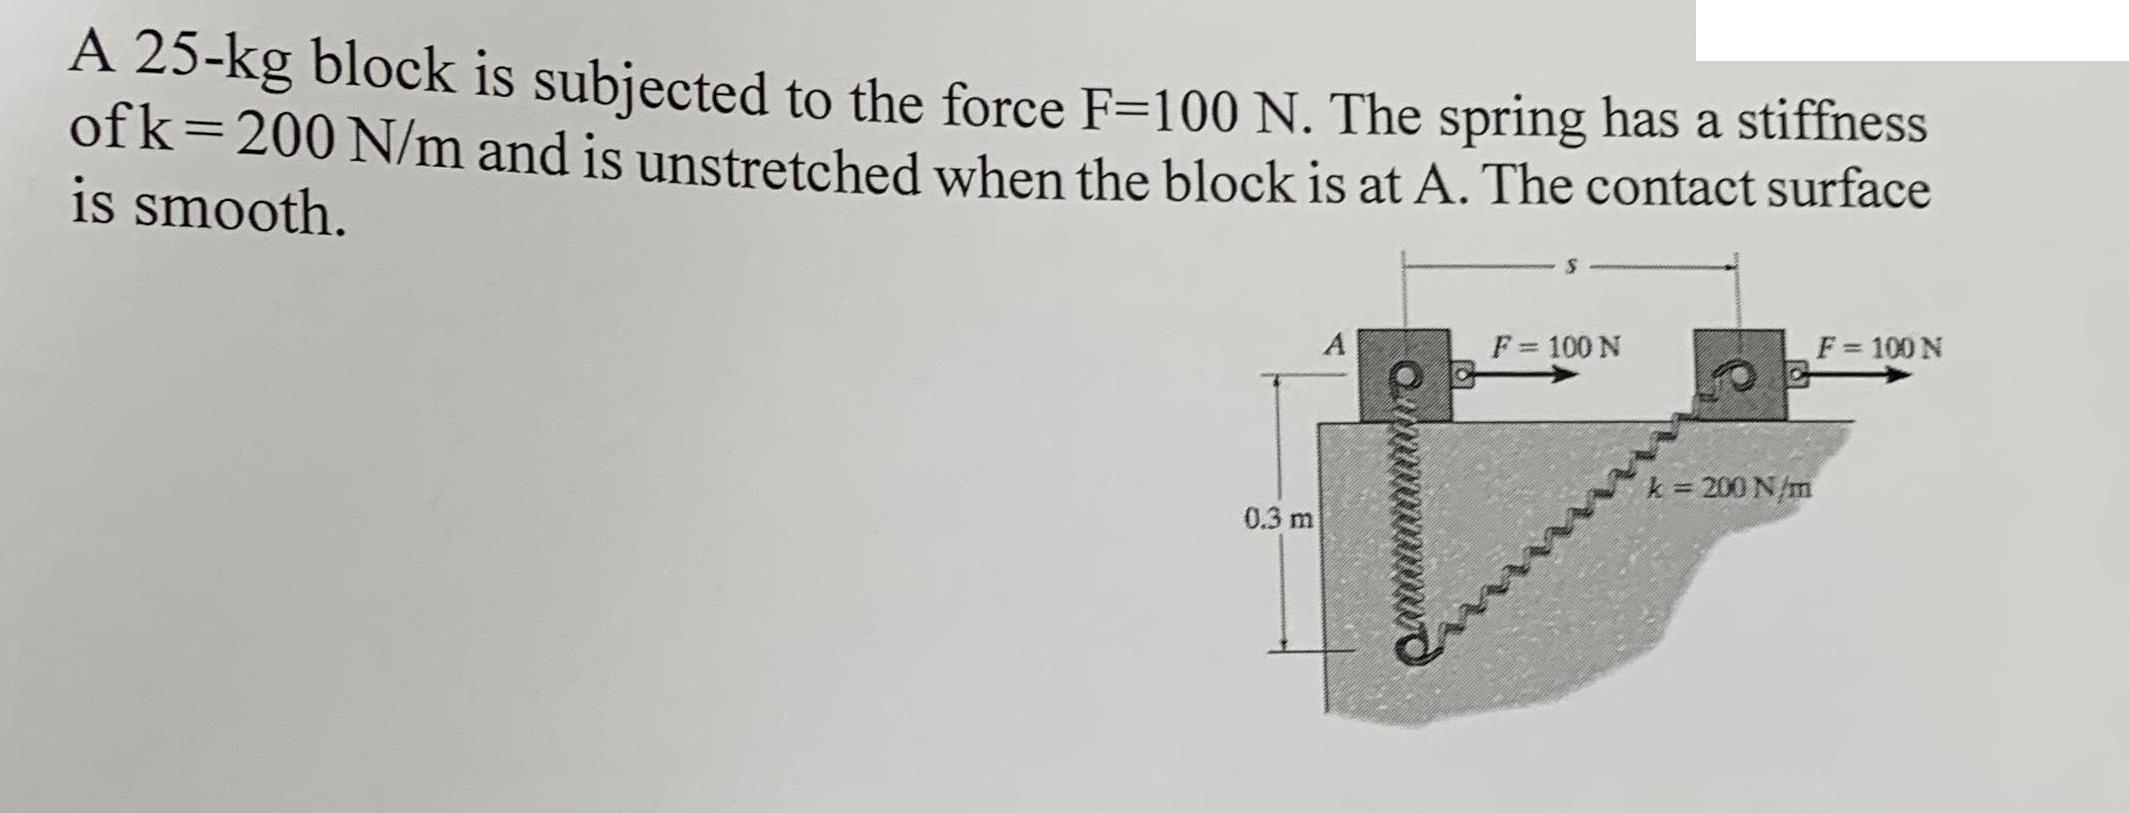 A 25-kg block is subjected to the force F=100 N. The spring has a stiffness ofk=200 N/m and is unstretched